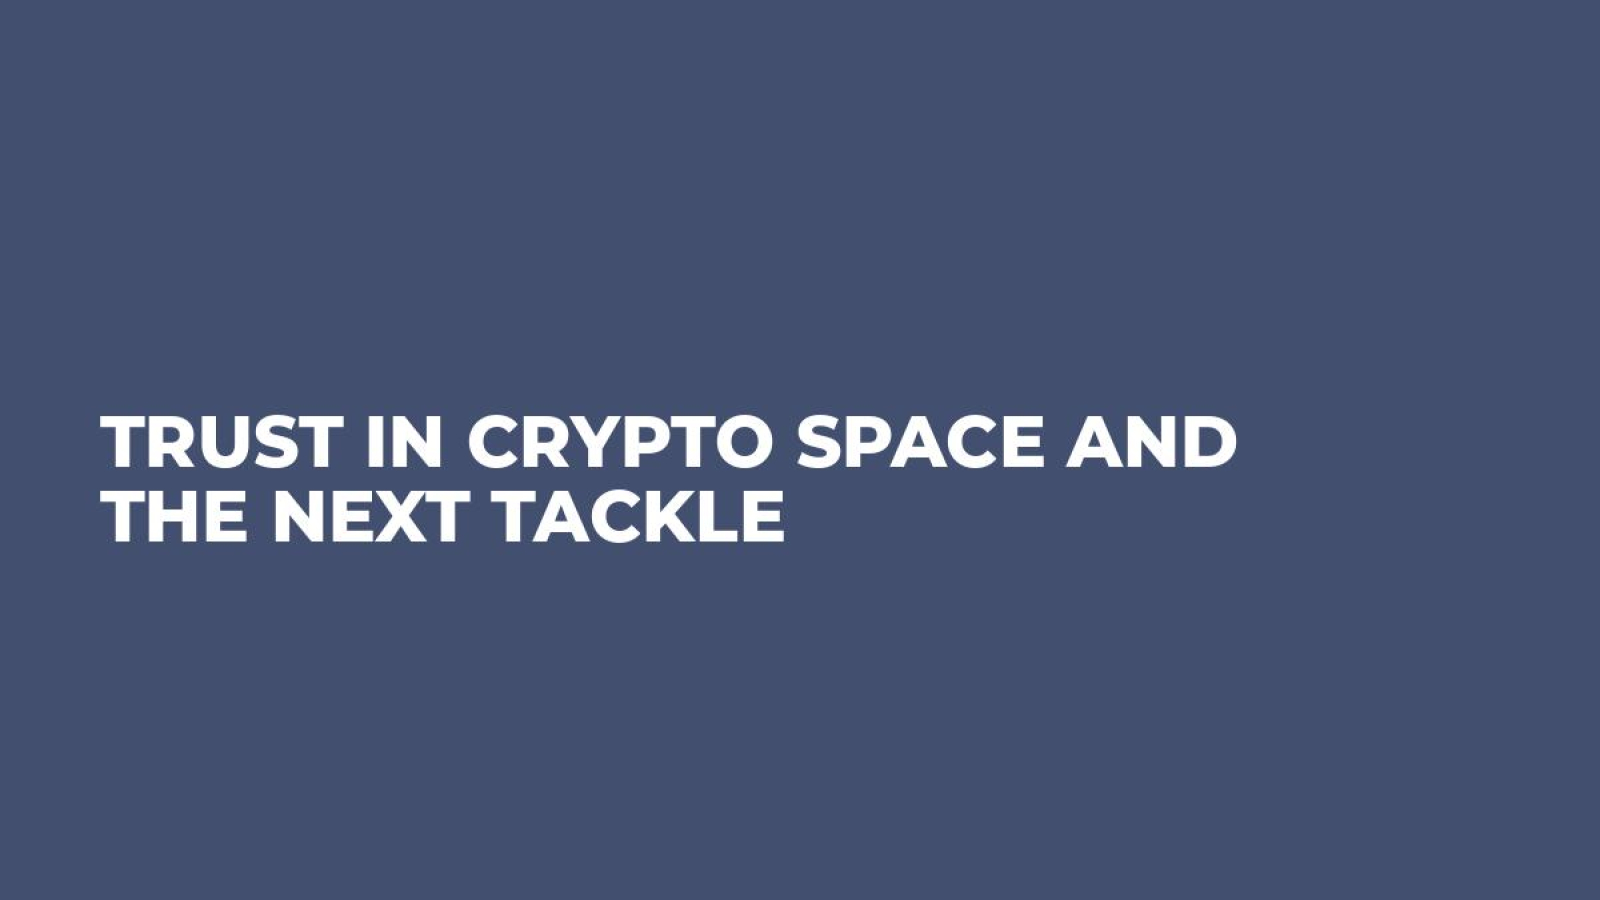 Trust in Crypto Space and the Next Tackle